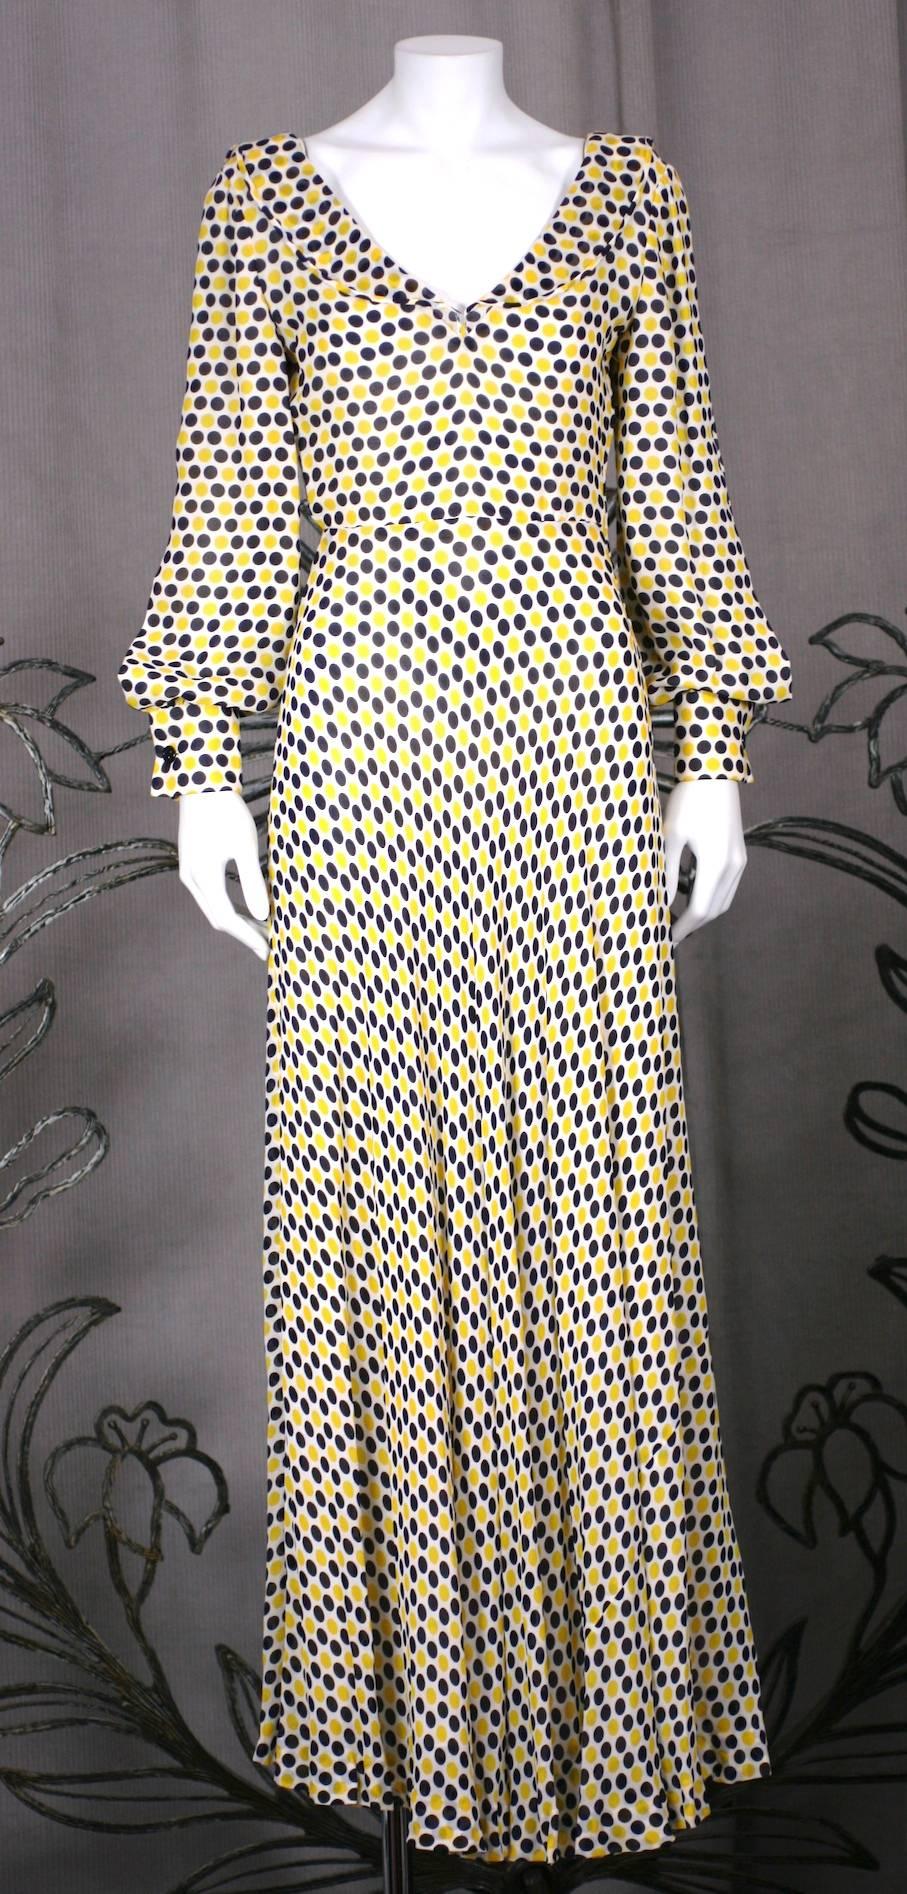 James Galanos vibrant, one piece polka dot crepe gown with flounced ruffle at neckline from the 1970's. Timeless styling and beautifully crafted with an ivory silk chiffon lining and bias piped edges and seams throughout. Bias cut crepe on bodice